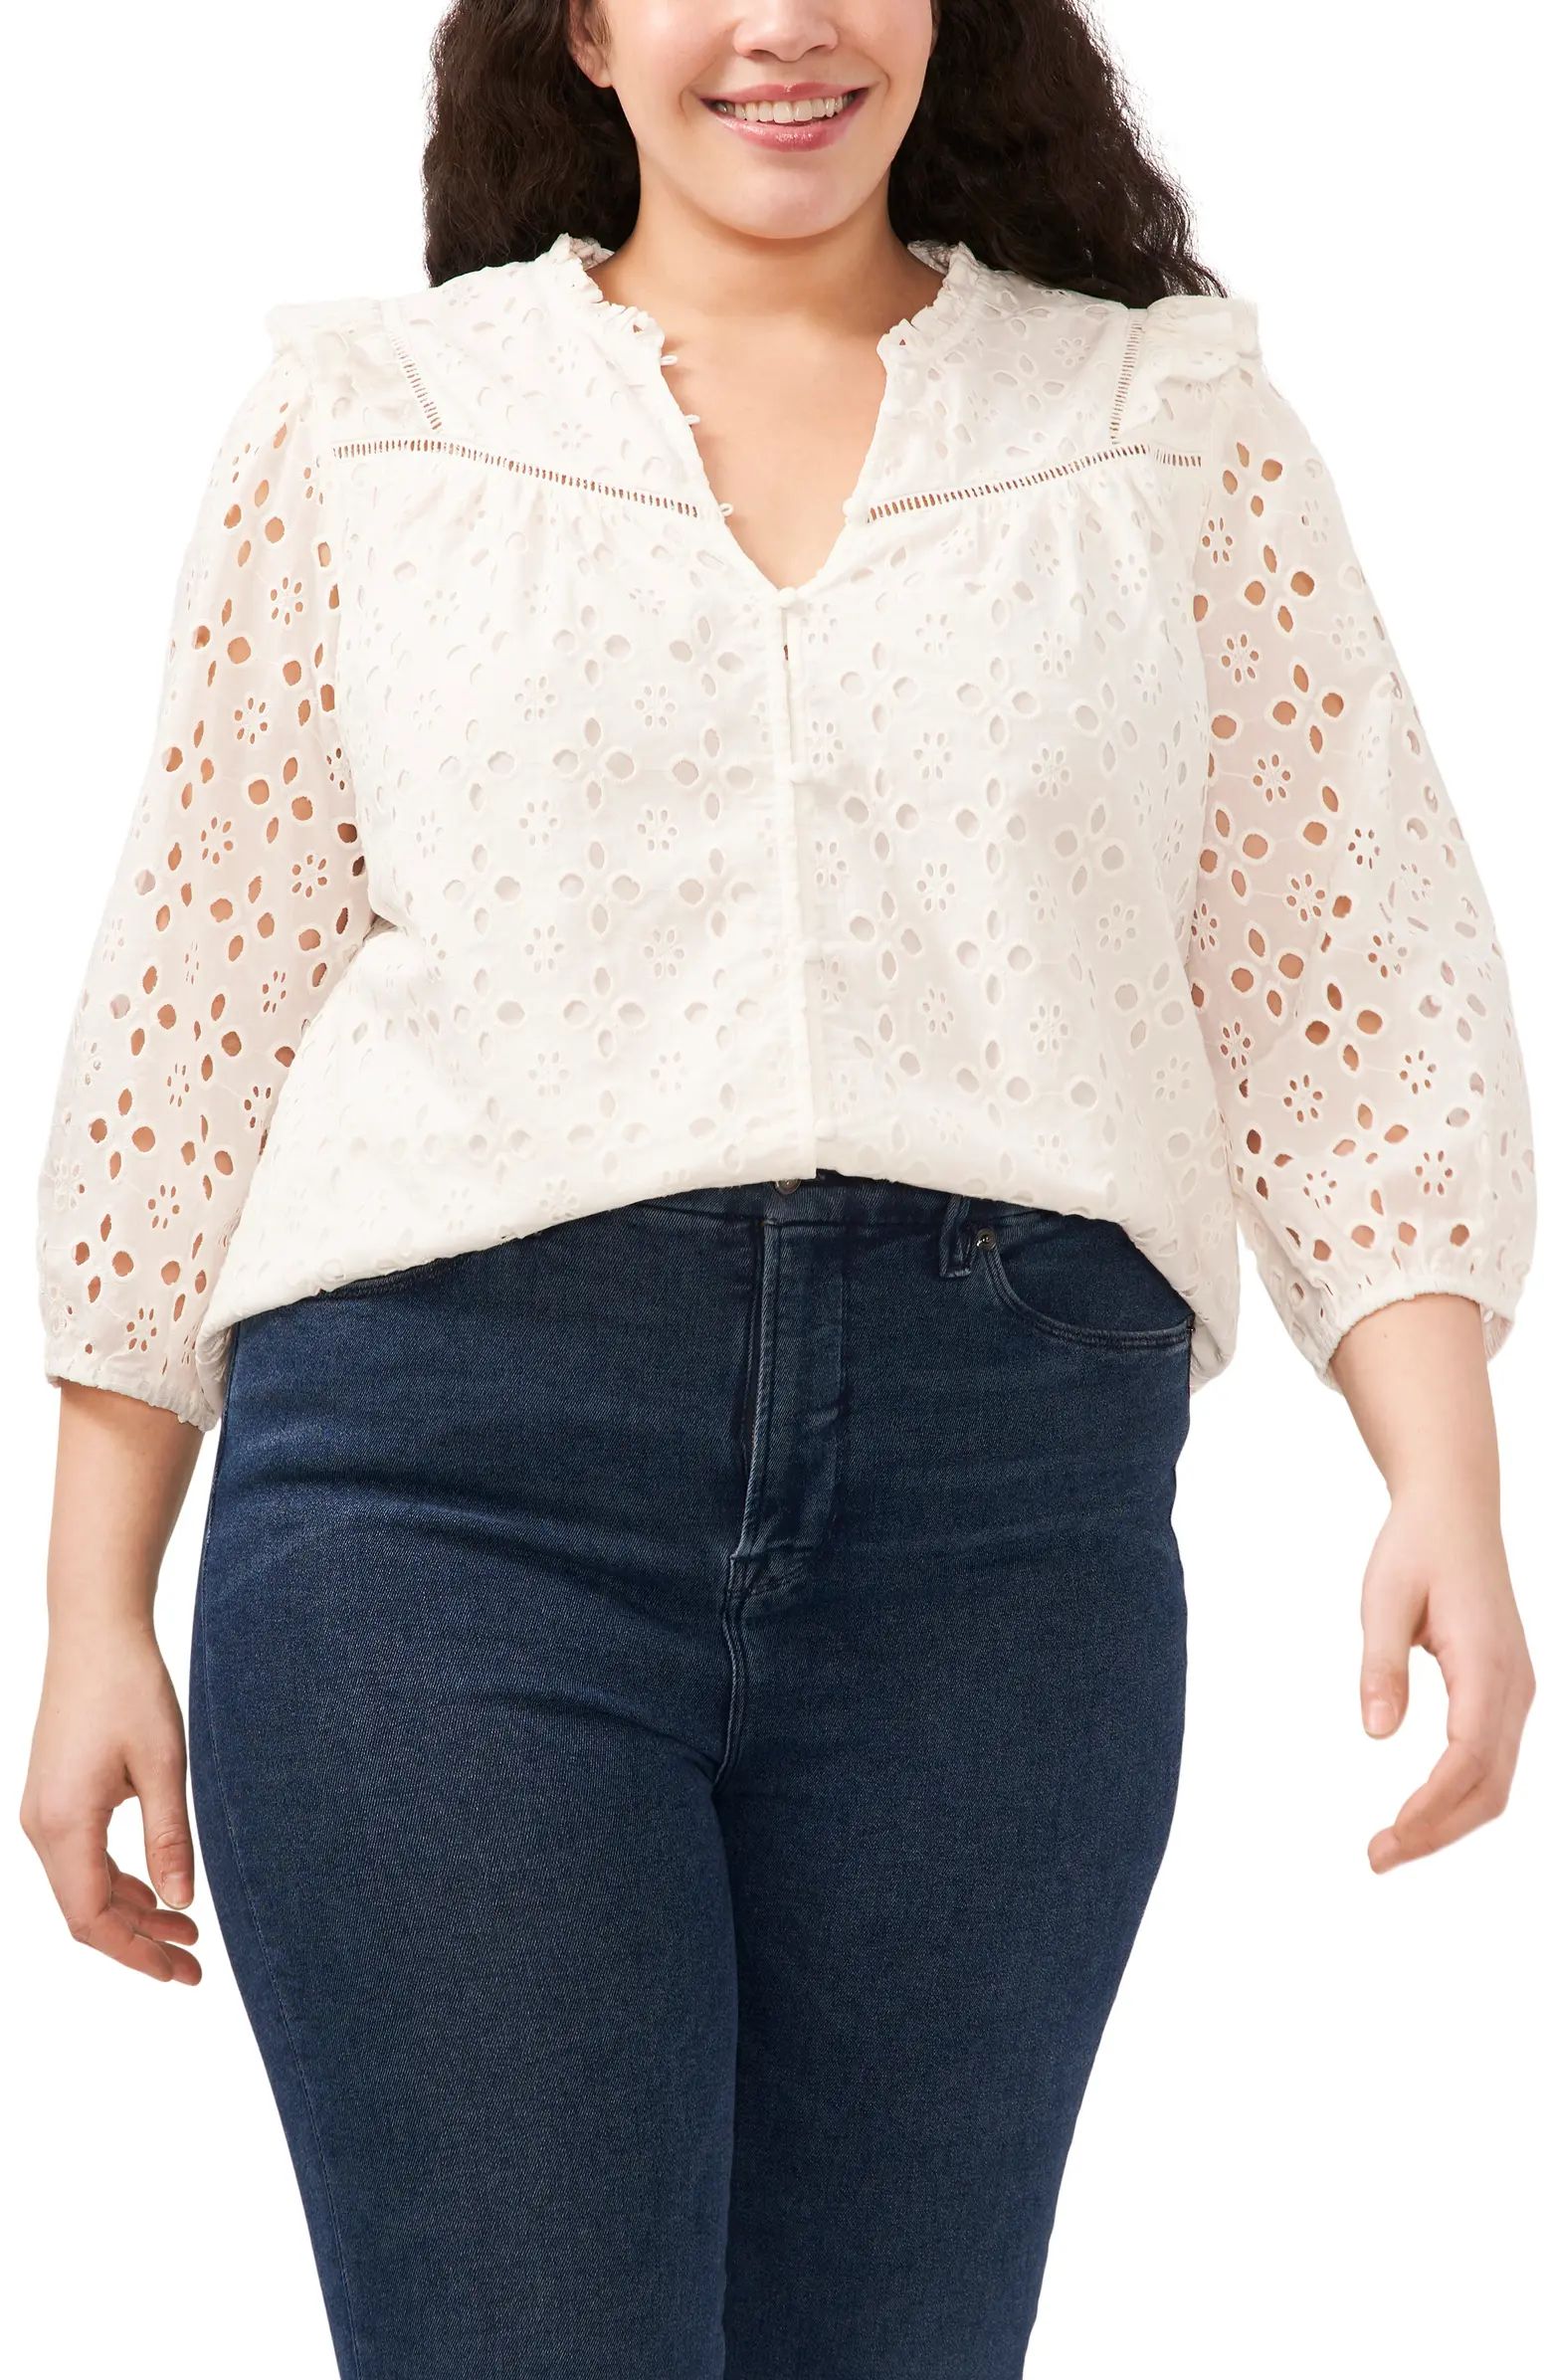 Floral eyelet embroidery adorns this airy cotton blouse featuring a front button-and-loop closure... | Nordstrom